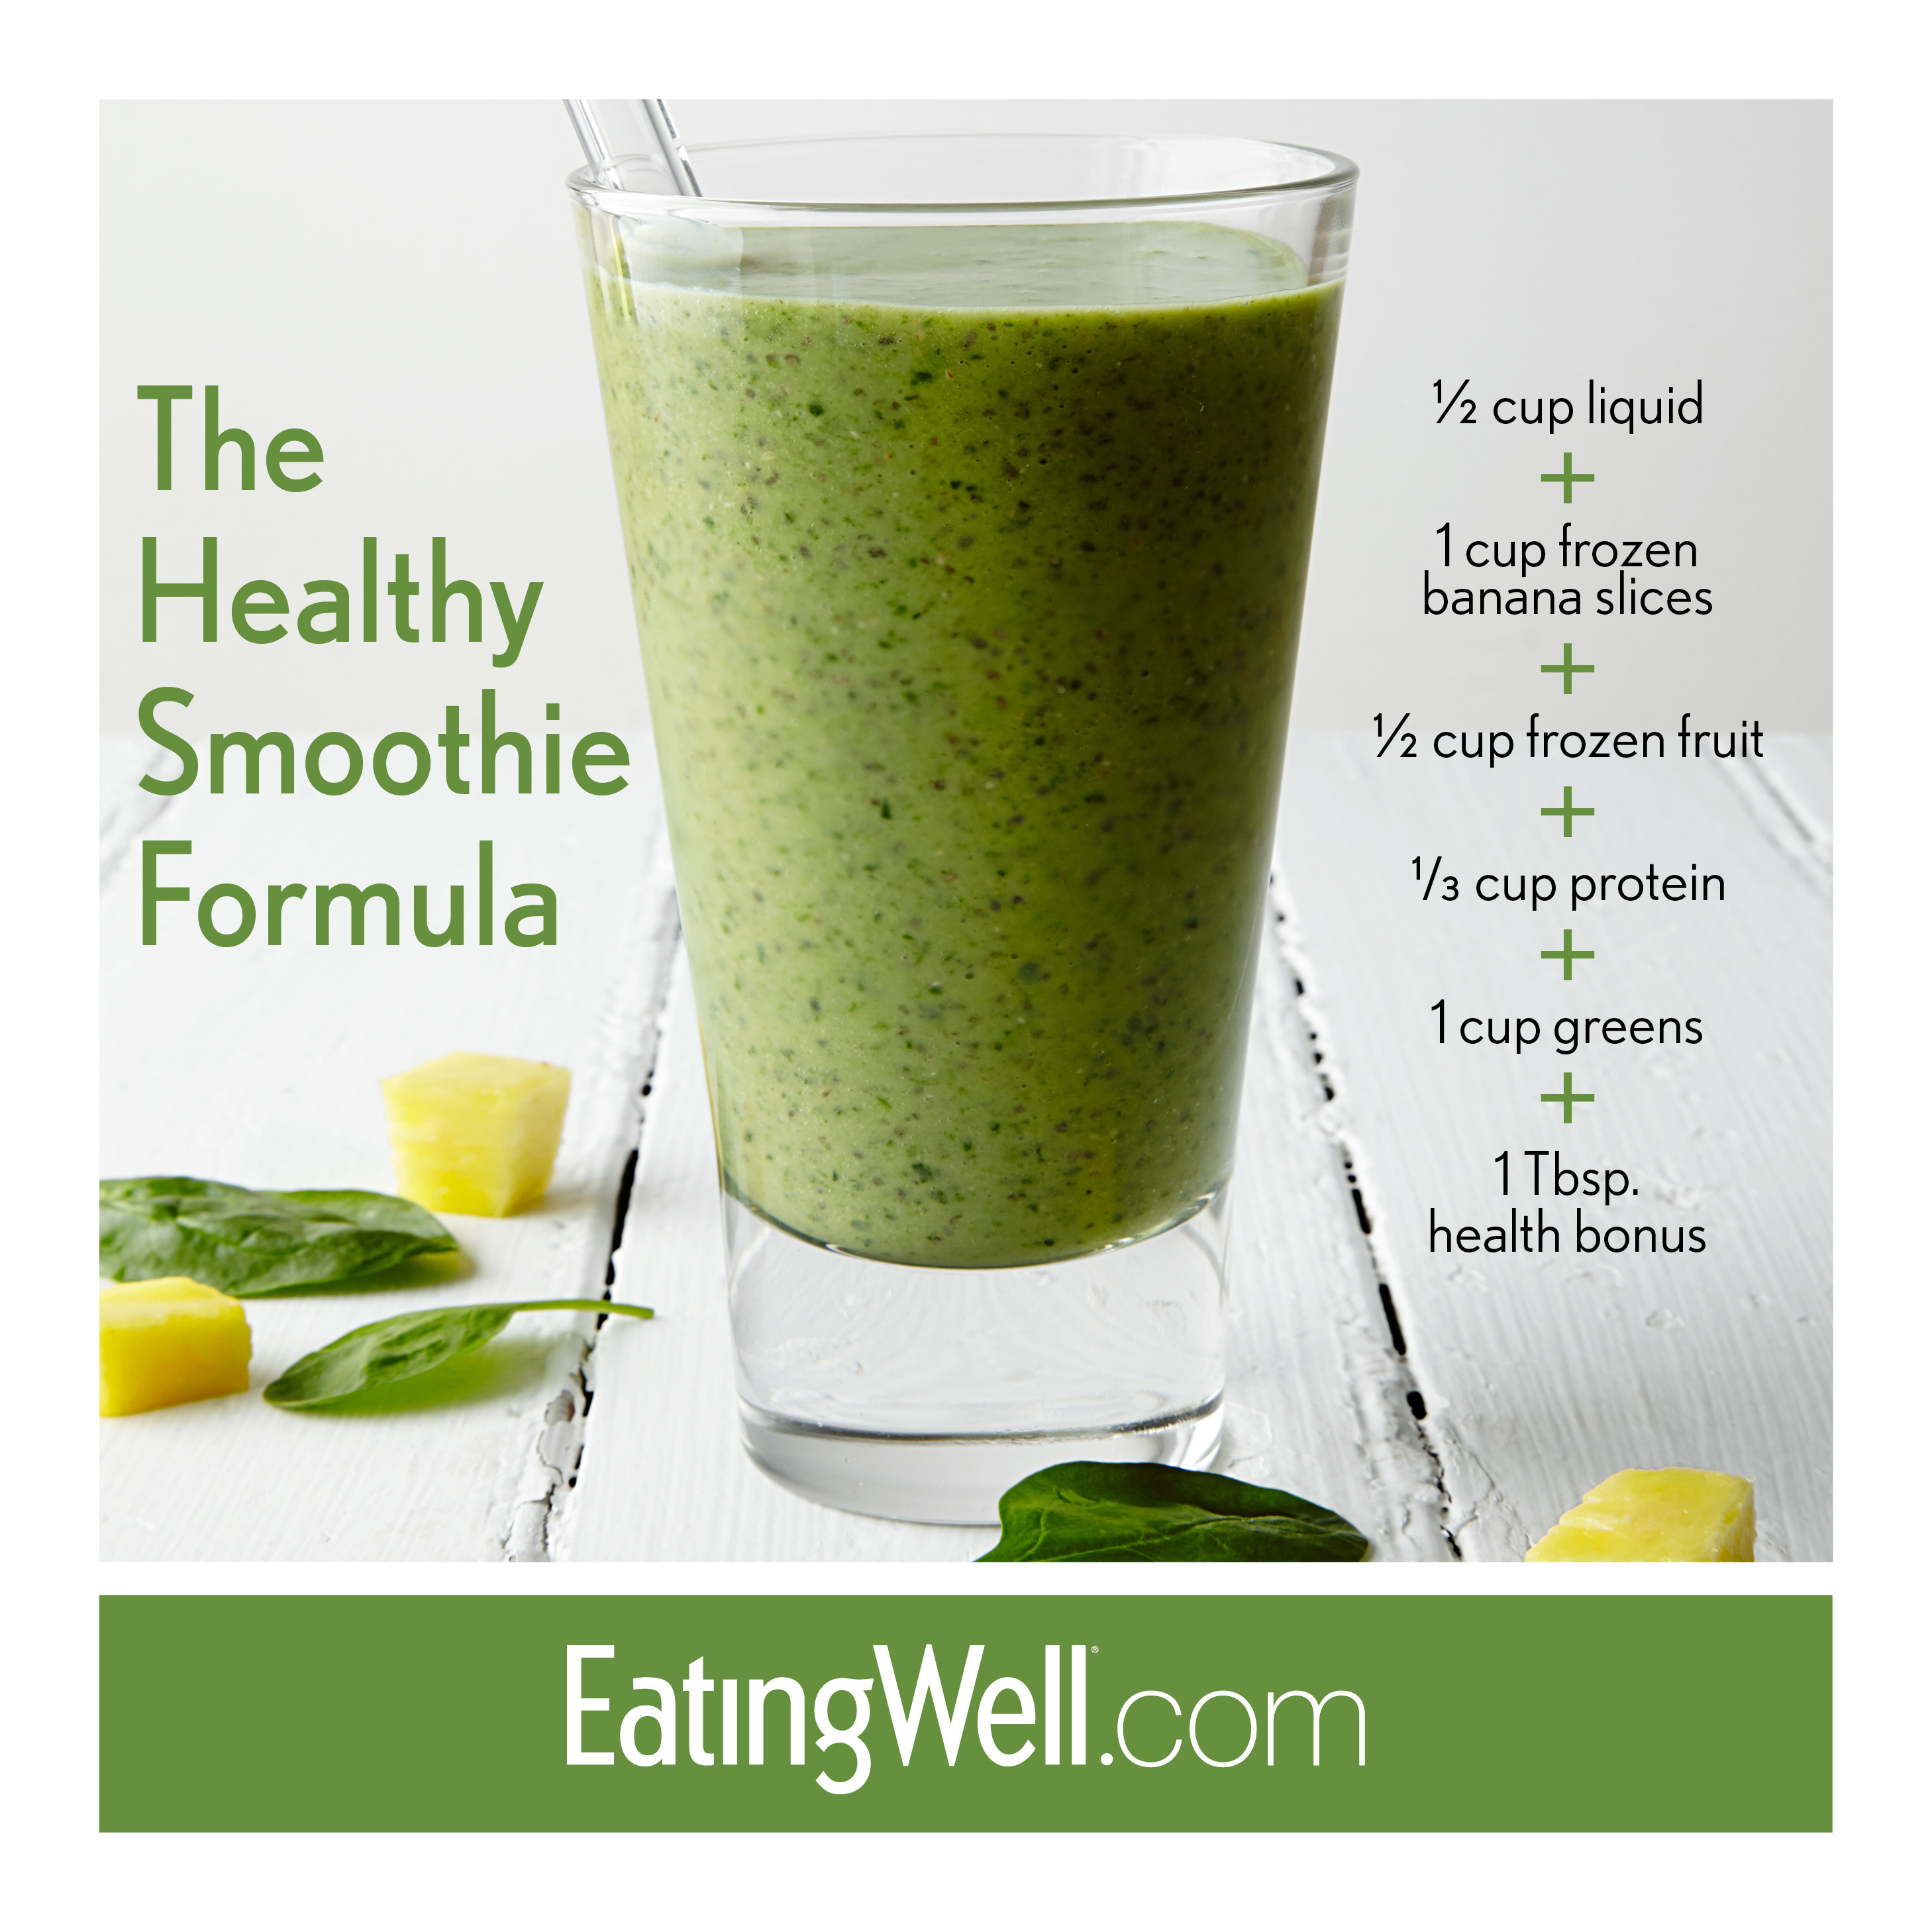 Best Healthy Smoothie Recipes
 The Ultimate Green Smoothie Recipe EatingWell